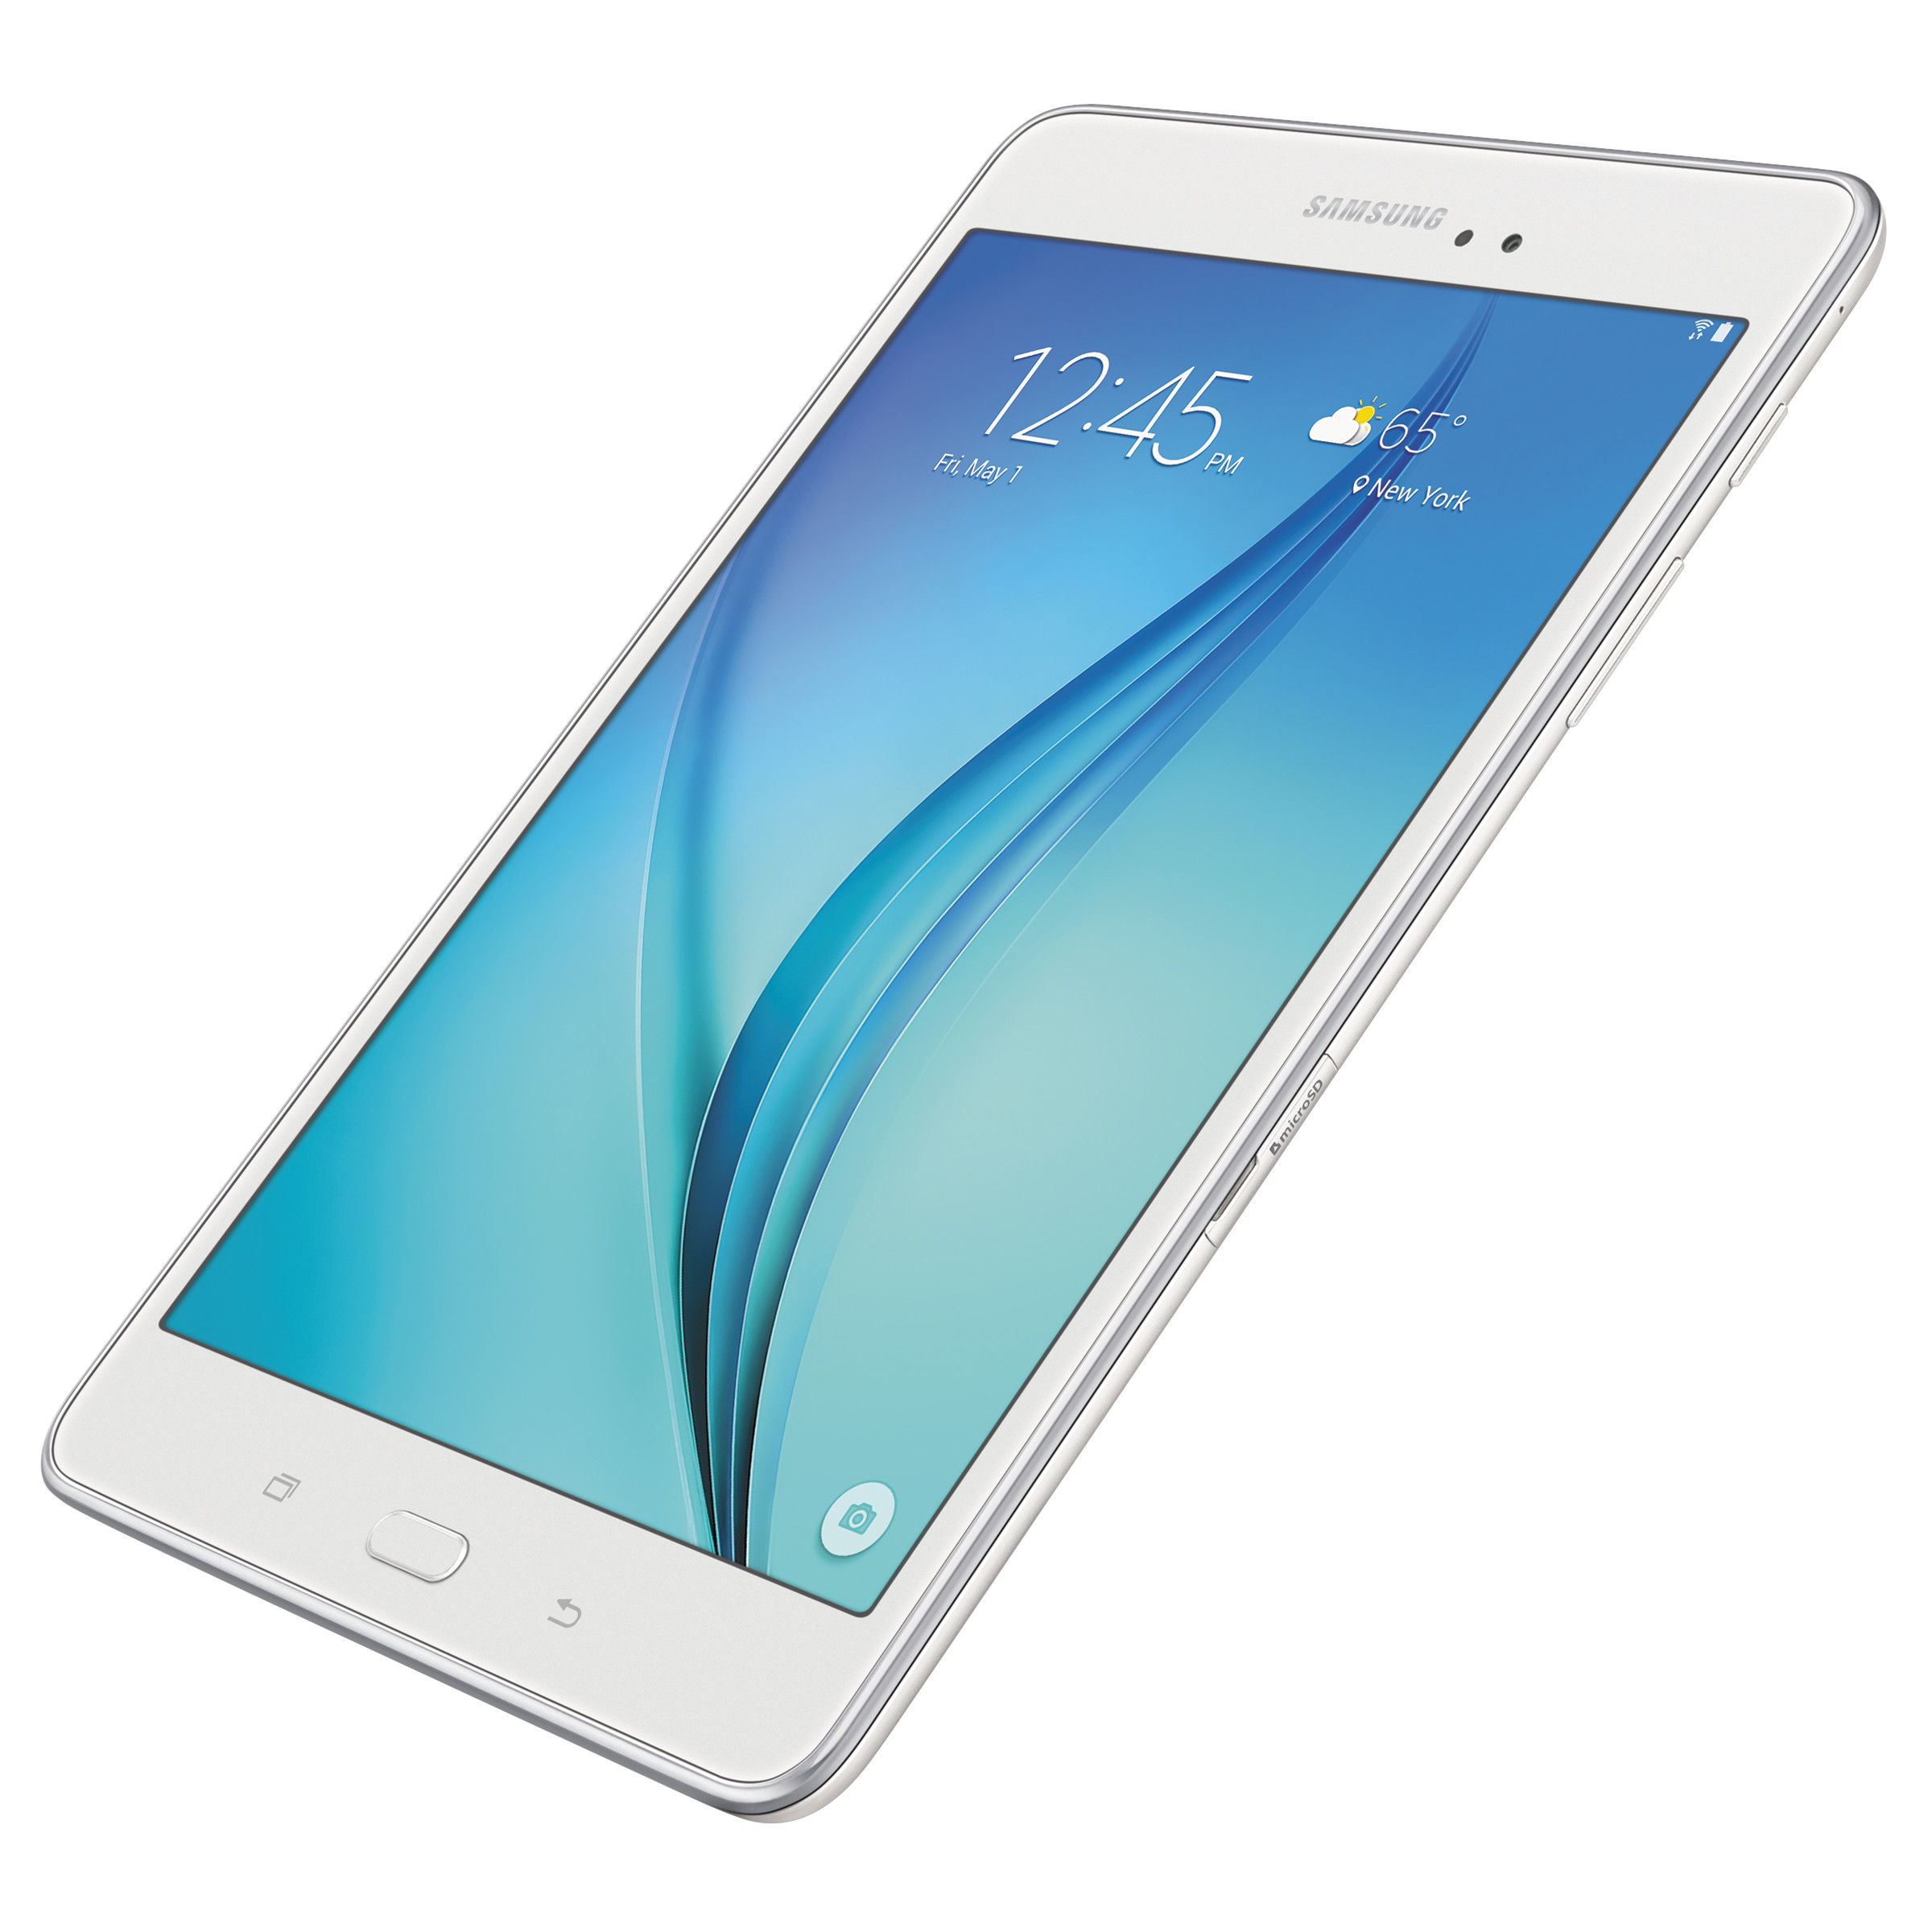 Samsung Galaxy Tab A - tablet - Android 5.0 (Lollipop) - 16 GB - 8" , White - image 2 of 2